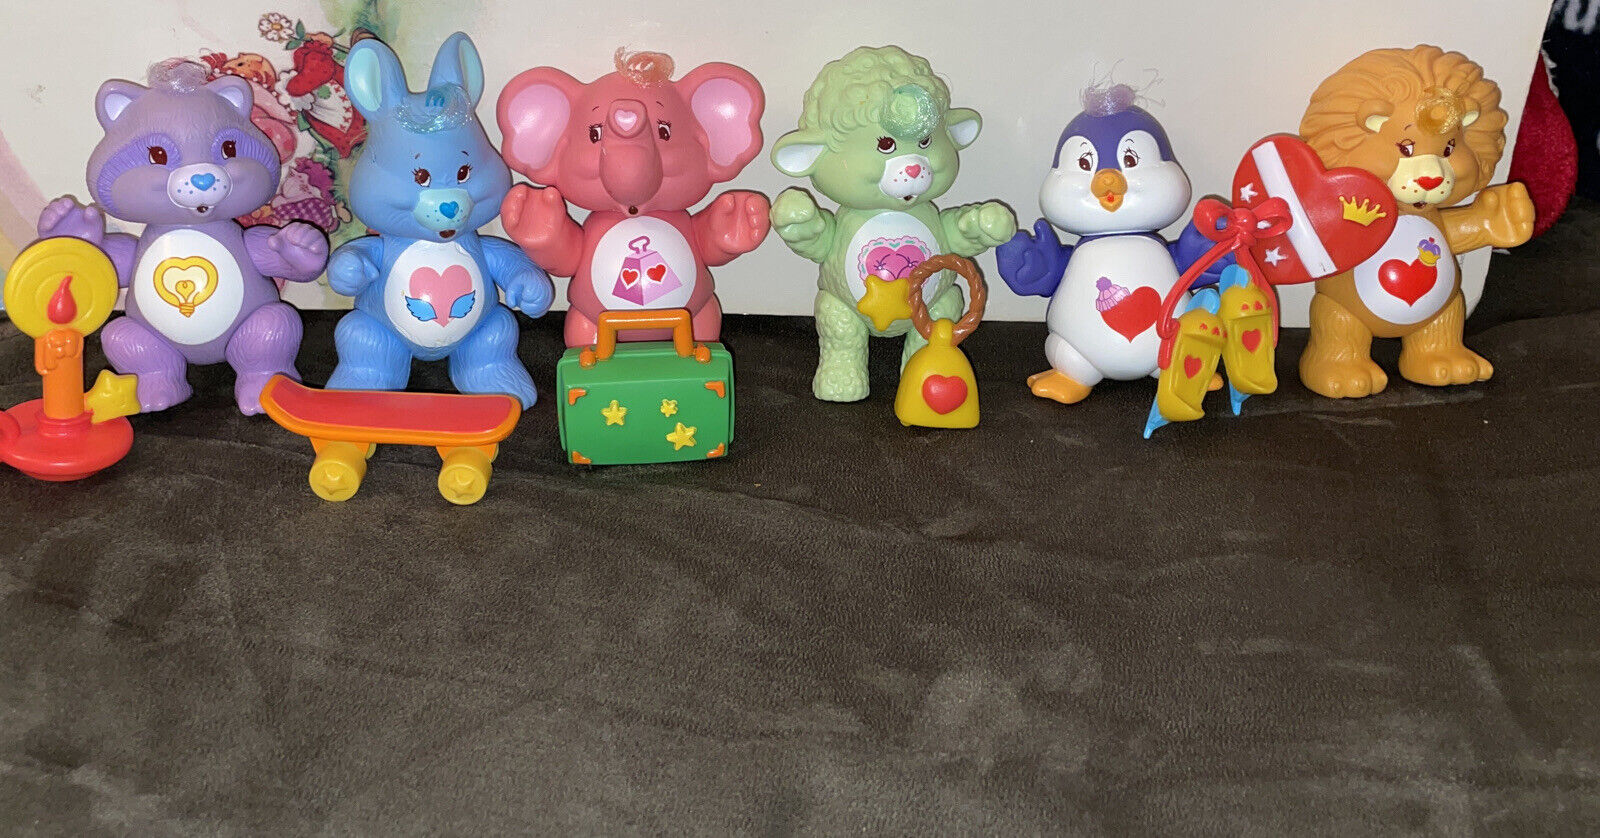 Care Bears Cousins Complete Set & Accessories 1980's Kenner Poseable Pvc Figures